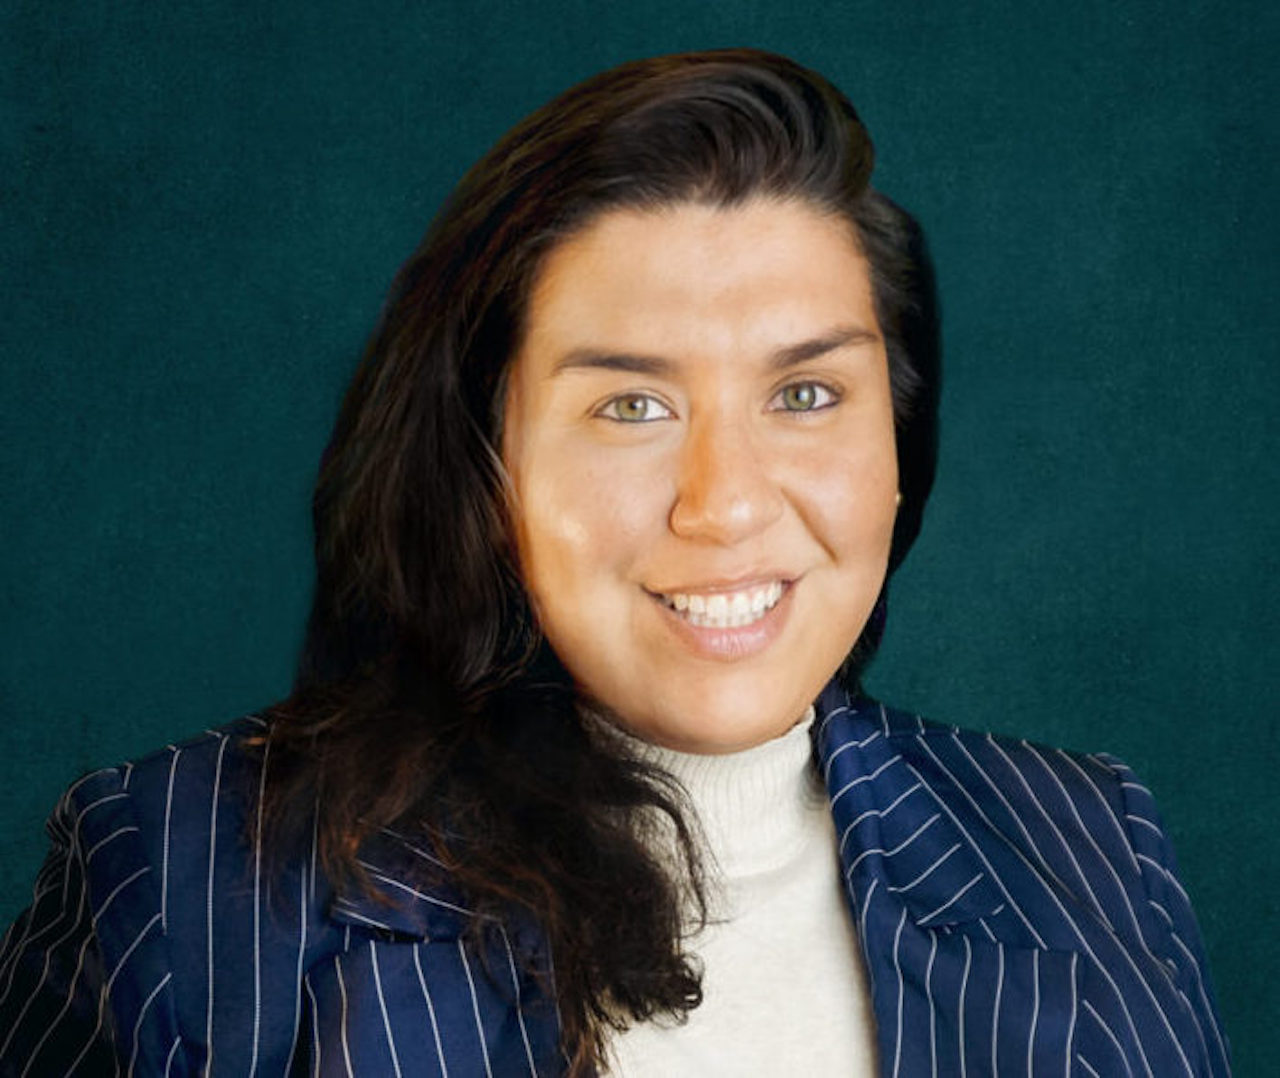 Andréa M. Garcia was recently appointed by the New Jersey Pride Chamber of Commerce as the first Hispanic Woman to sit on their Board of Directors. Photo: Andrea M. Garcia